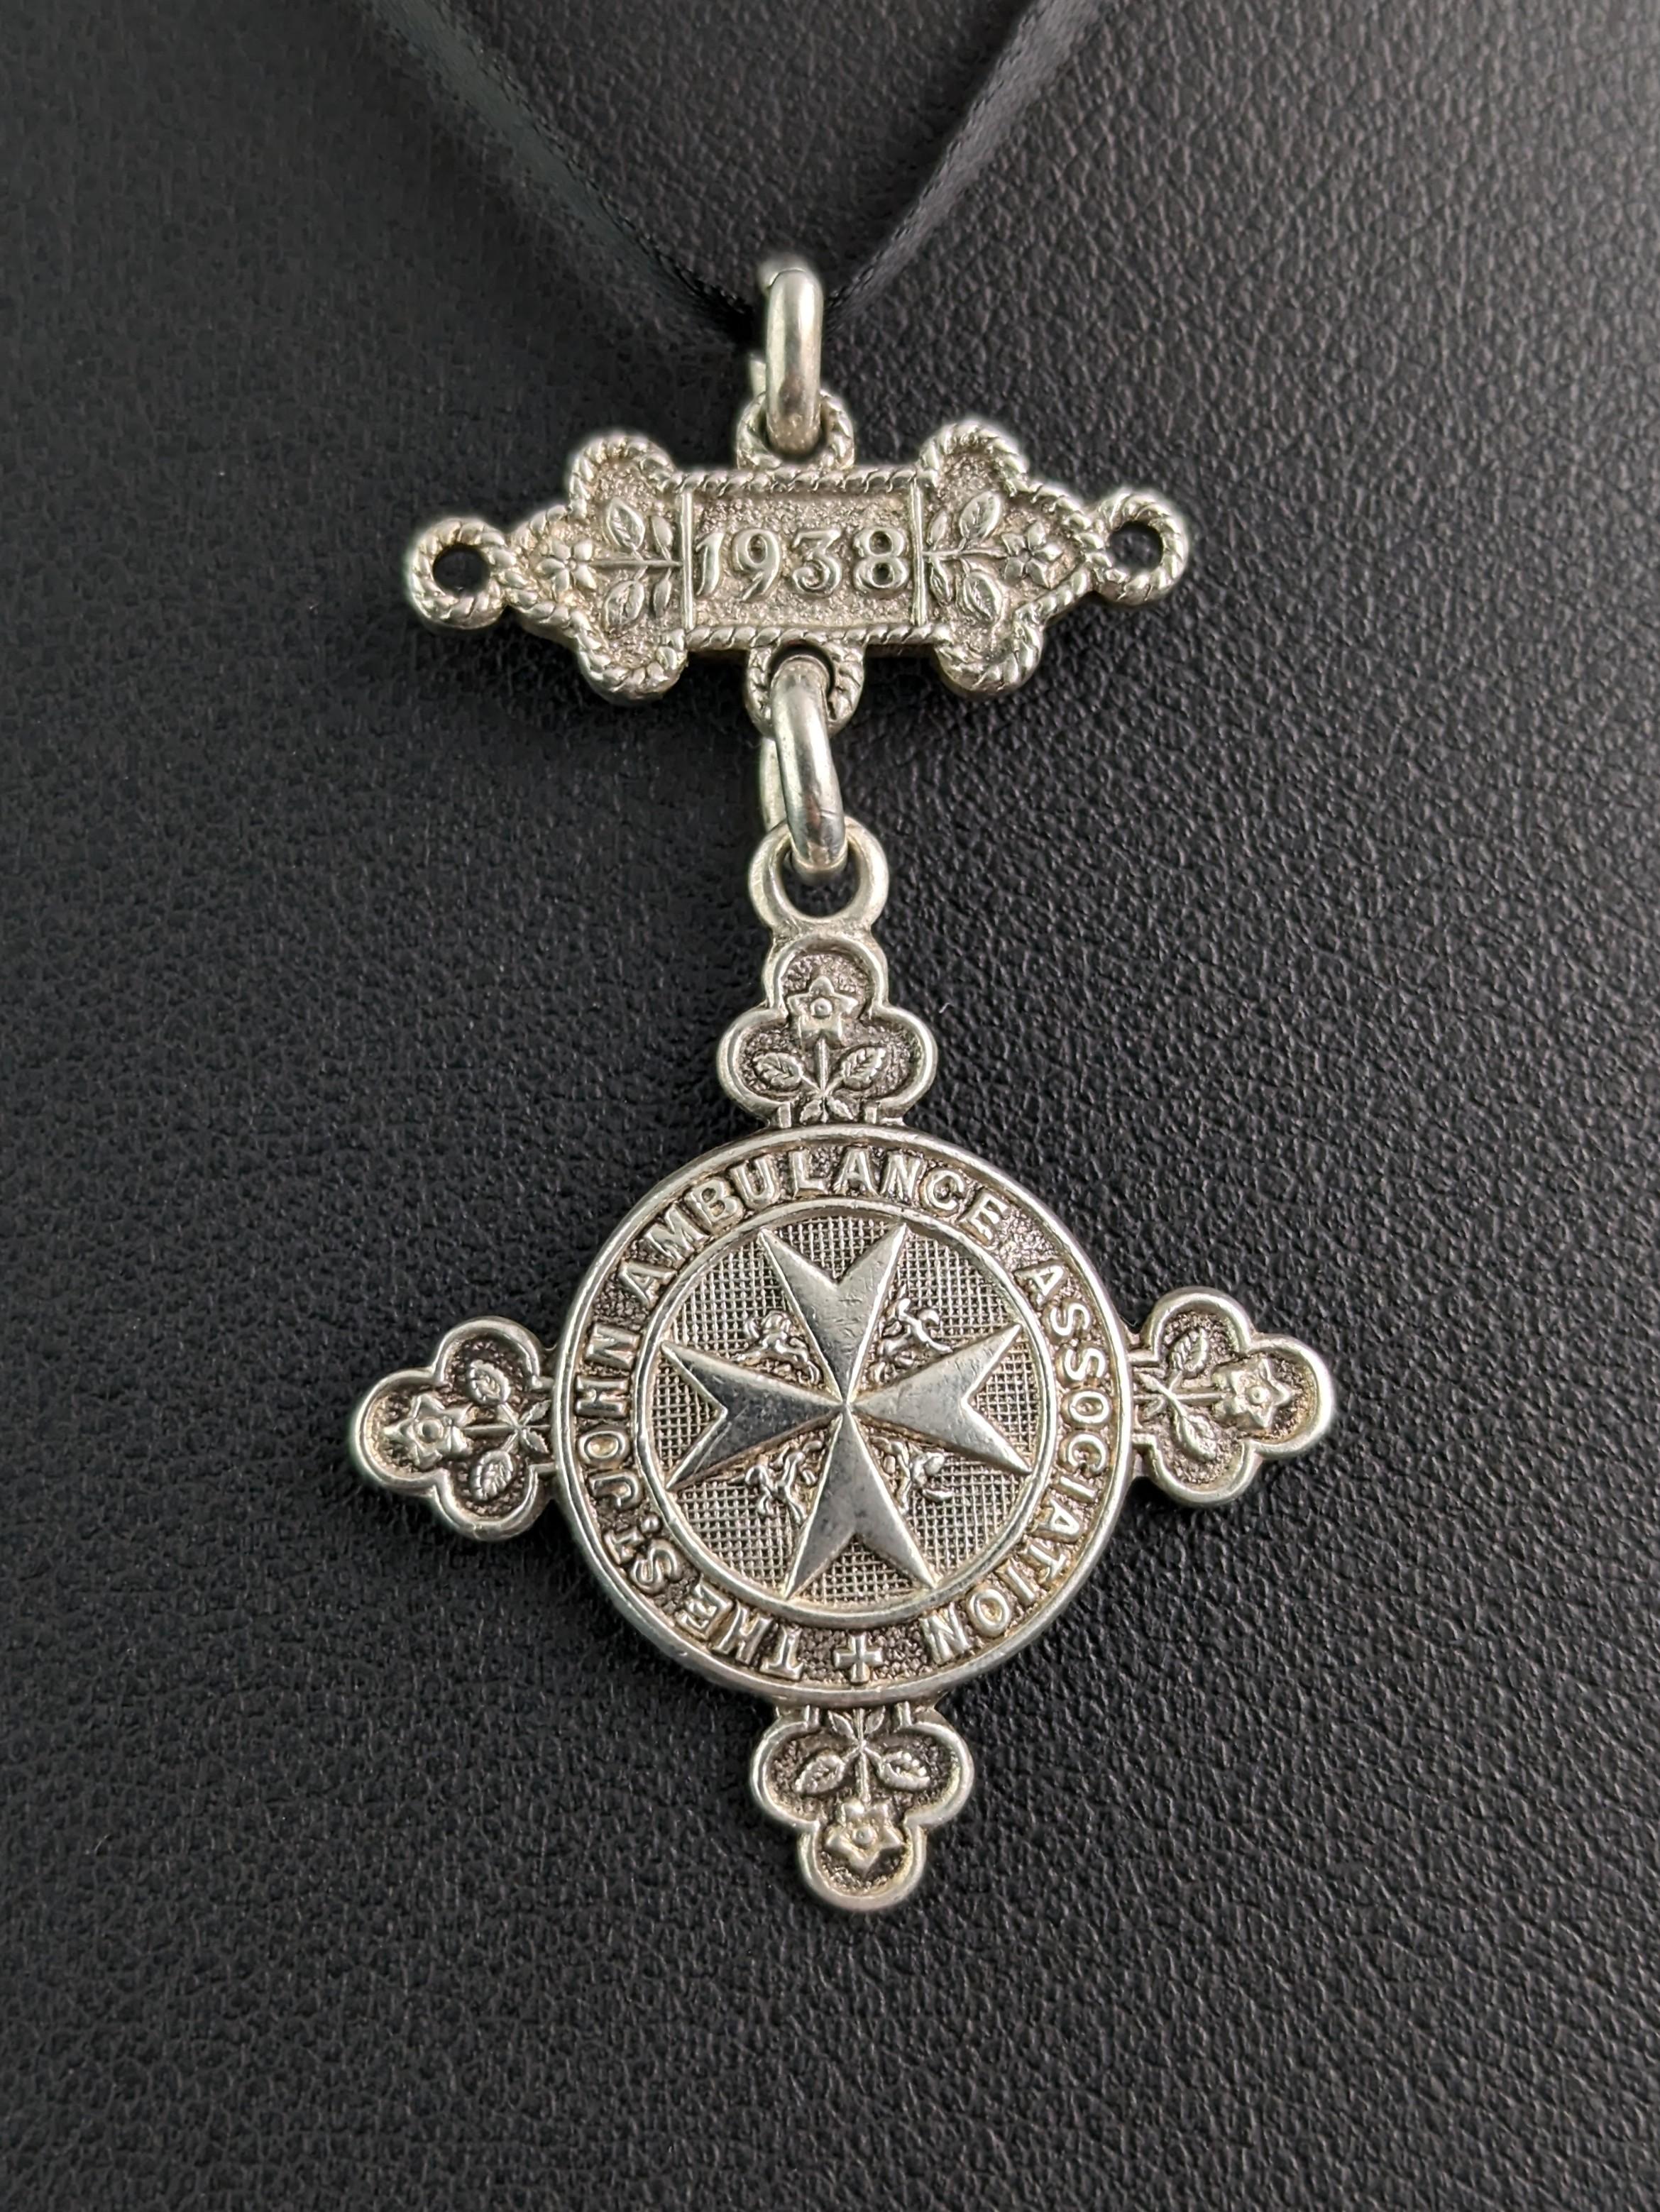 An interesting and decorative vintage silver fob pendant or medallion.

This attractive little fob is formed of two sections, the top bar section dated 1938 and the suspended fob, a circular shape with four trefoils bordering it, reading, The St